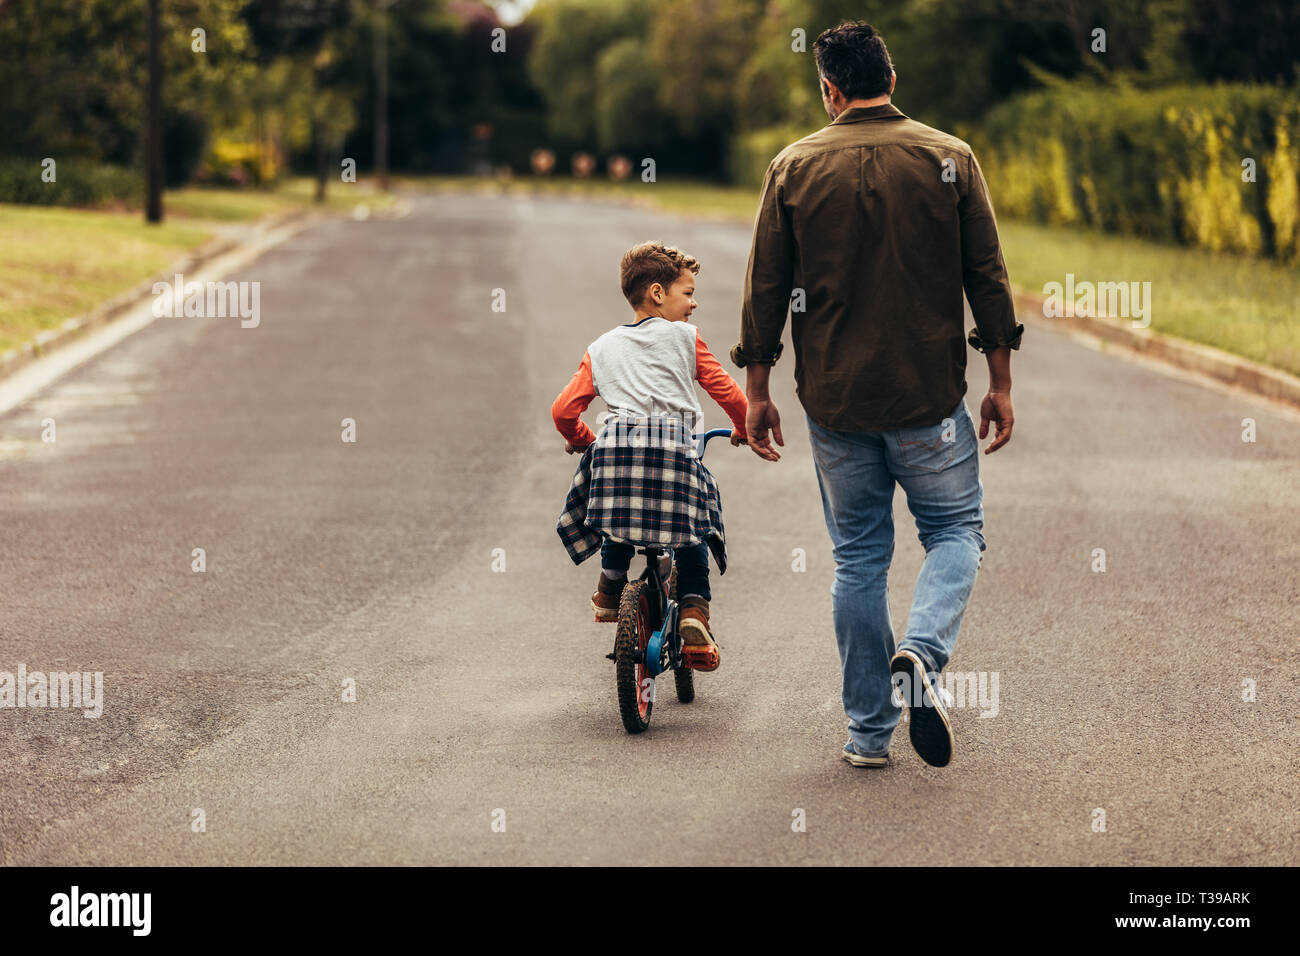 kid learning to ride a bicycle on an empty road. Rear view of a boy riding a bicycle while his father walks along with the kid. Stock Photo